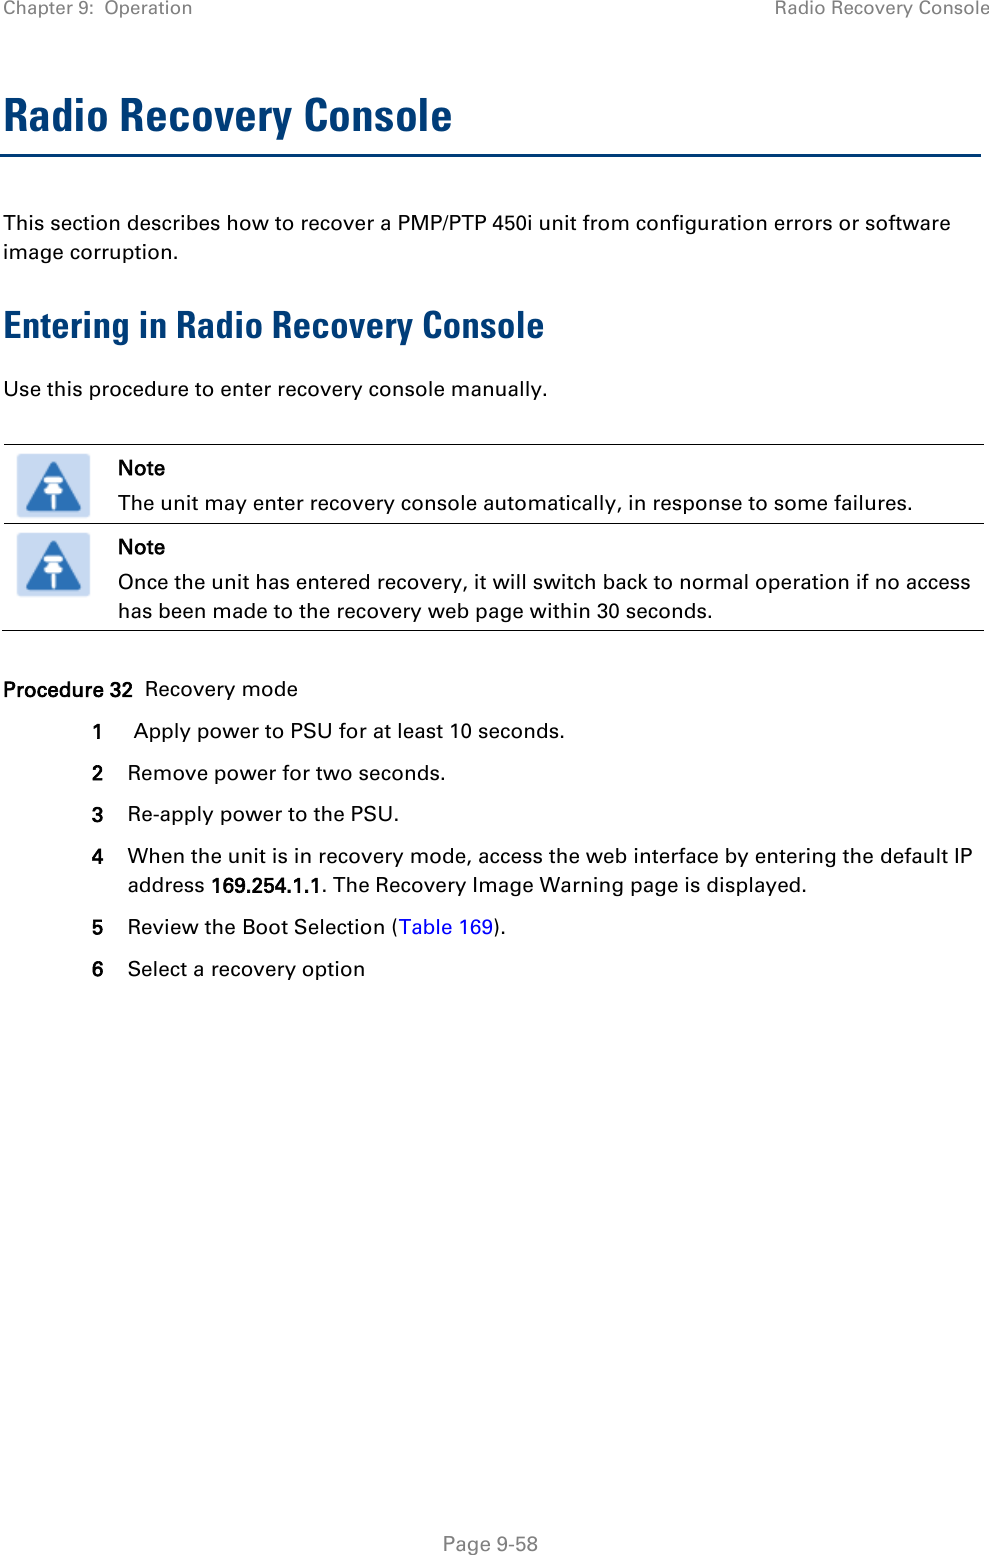 Chapter 9:  Operation Radio Recovery Console   Page 9-58 Radio Recovery Console This section describes how to recover a PMP/PTP 450i unit from configuration errors or software image corruption. Entering in Radio Recovery Console Use this procedure to enter recovery console manually.   Note The unit may enter recovery console automatically, in response to some failures.  Note Once the unit has entered recovery, it will switch back to normal operation if no access has been made to the recovery web page within 30 seconds.  Procedure 32  Recovery mode 1  Apply power to PSU for at least 10 seconds. 2 Remove power for two seconds. 3 Re-apply power to the PSU. 4 When the unit is in recovery mode, access the web interface by entering the default IP address 169.254.1.1. The Recovery Image Warning page is displayed. 5 Review the Boot Selection (Table 169). 6 Select a recovery option  